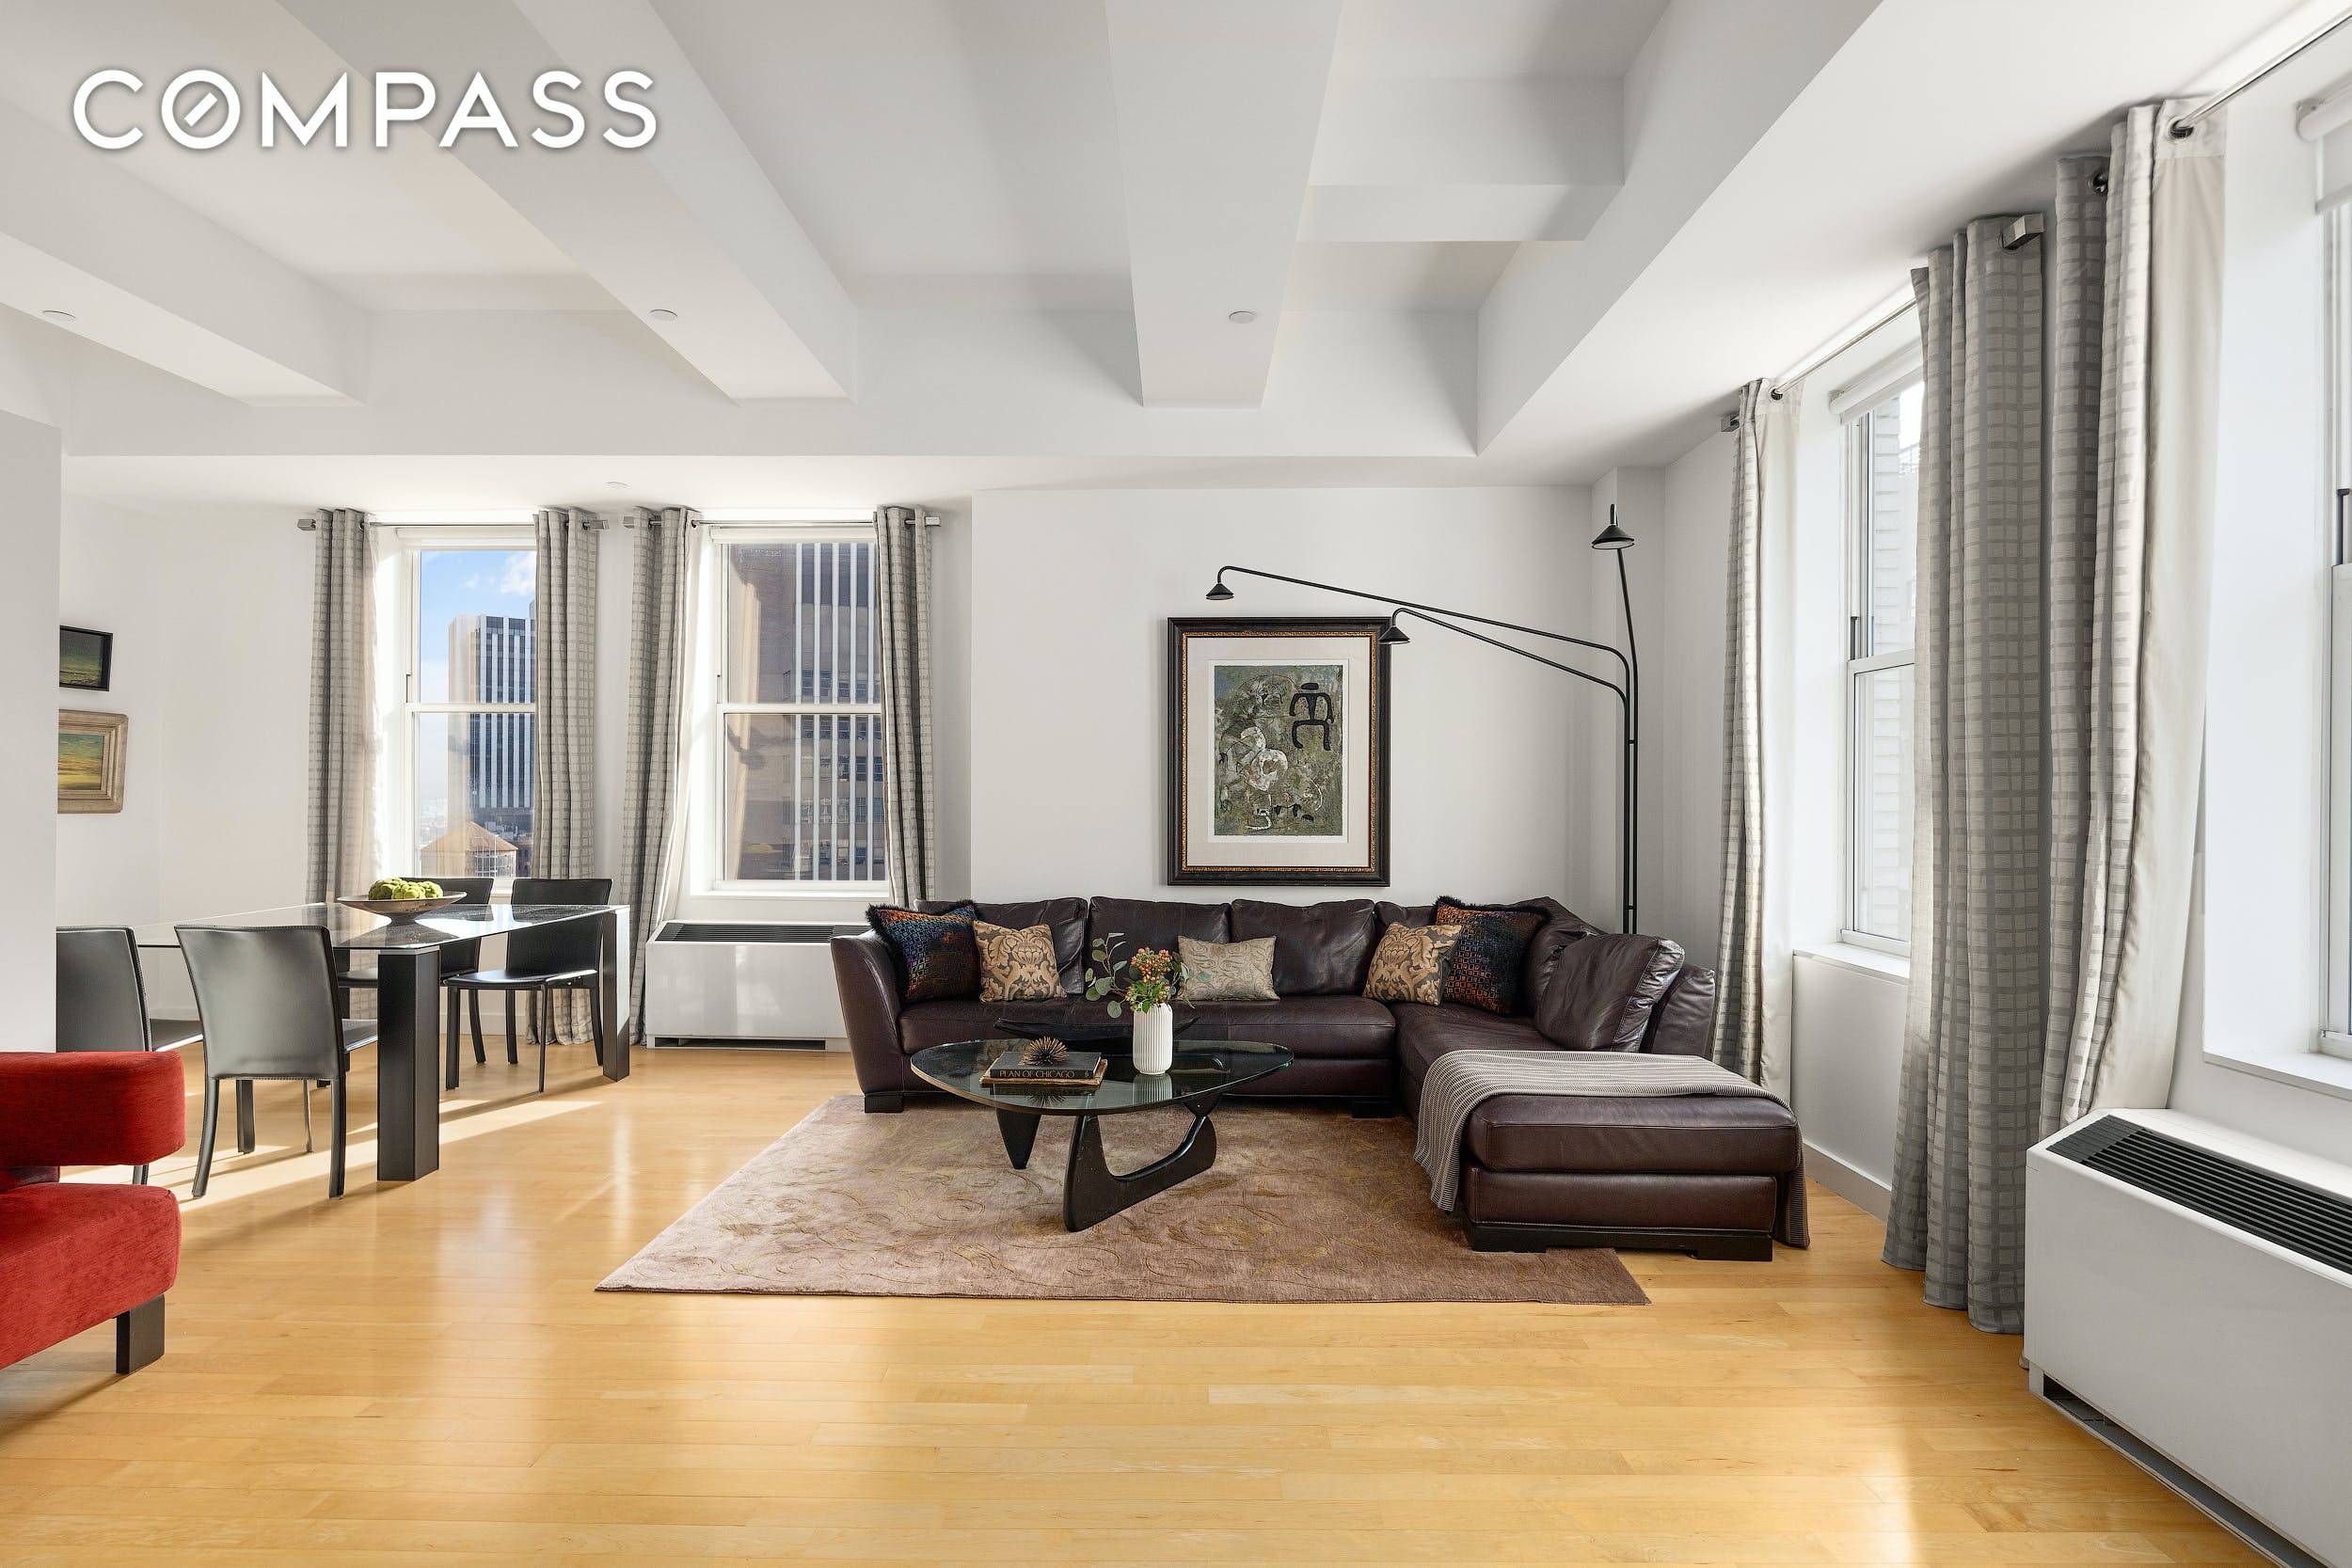 THE RESIDENCE Welcome to the market Apartment 2720 at FiDi s most sought after building.